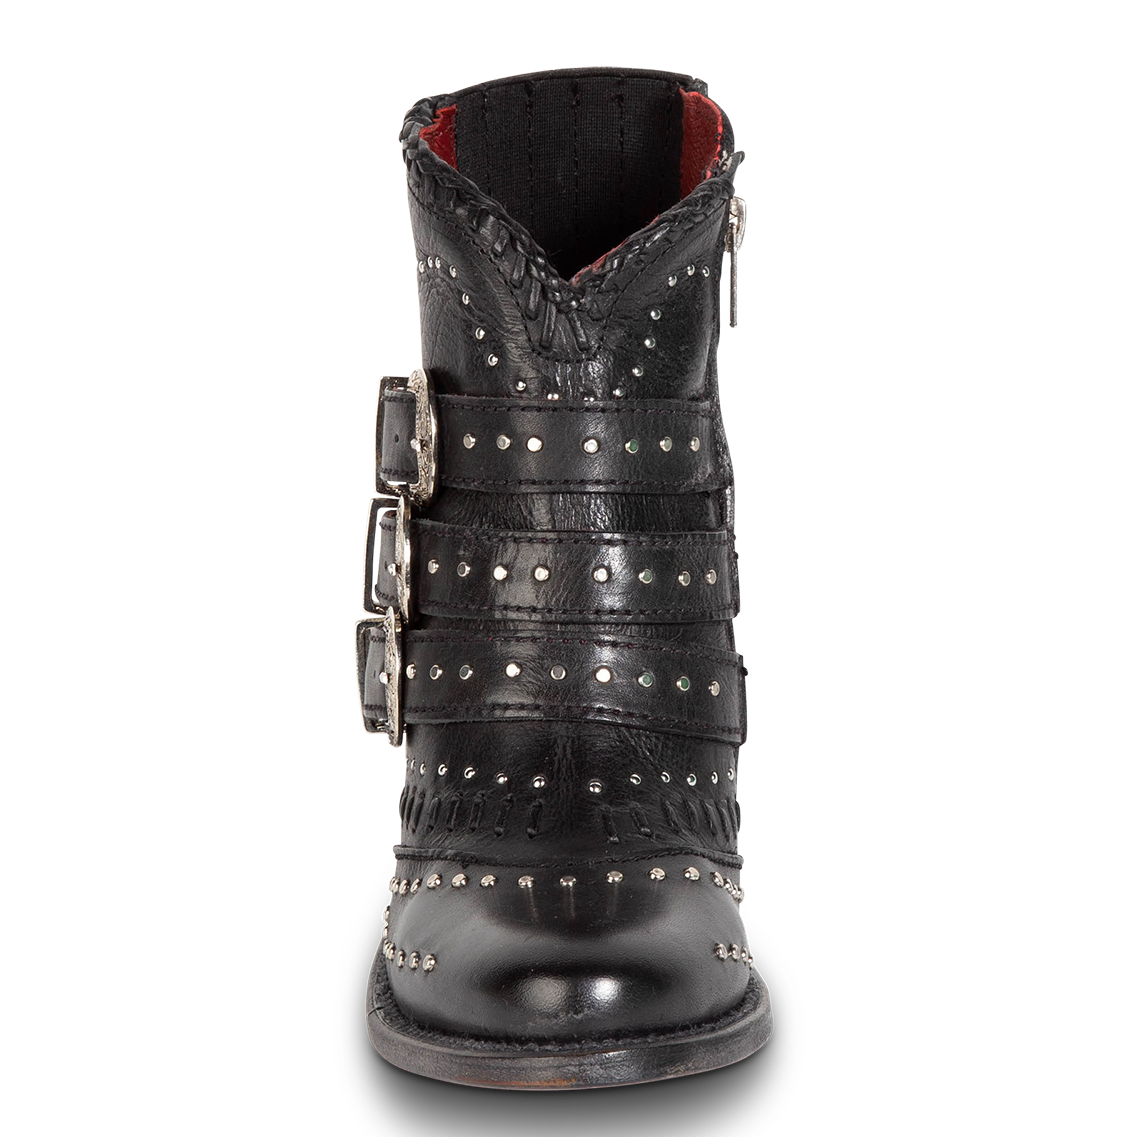 Front view showing leather straps with stud detailing on FREEBIRD women's Savanna black leather ankle bootie